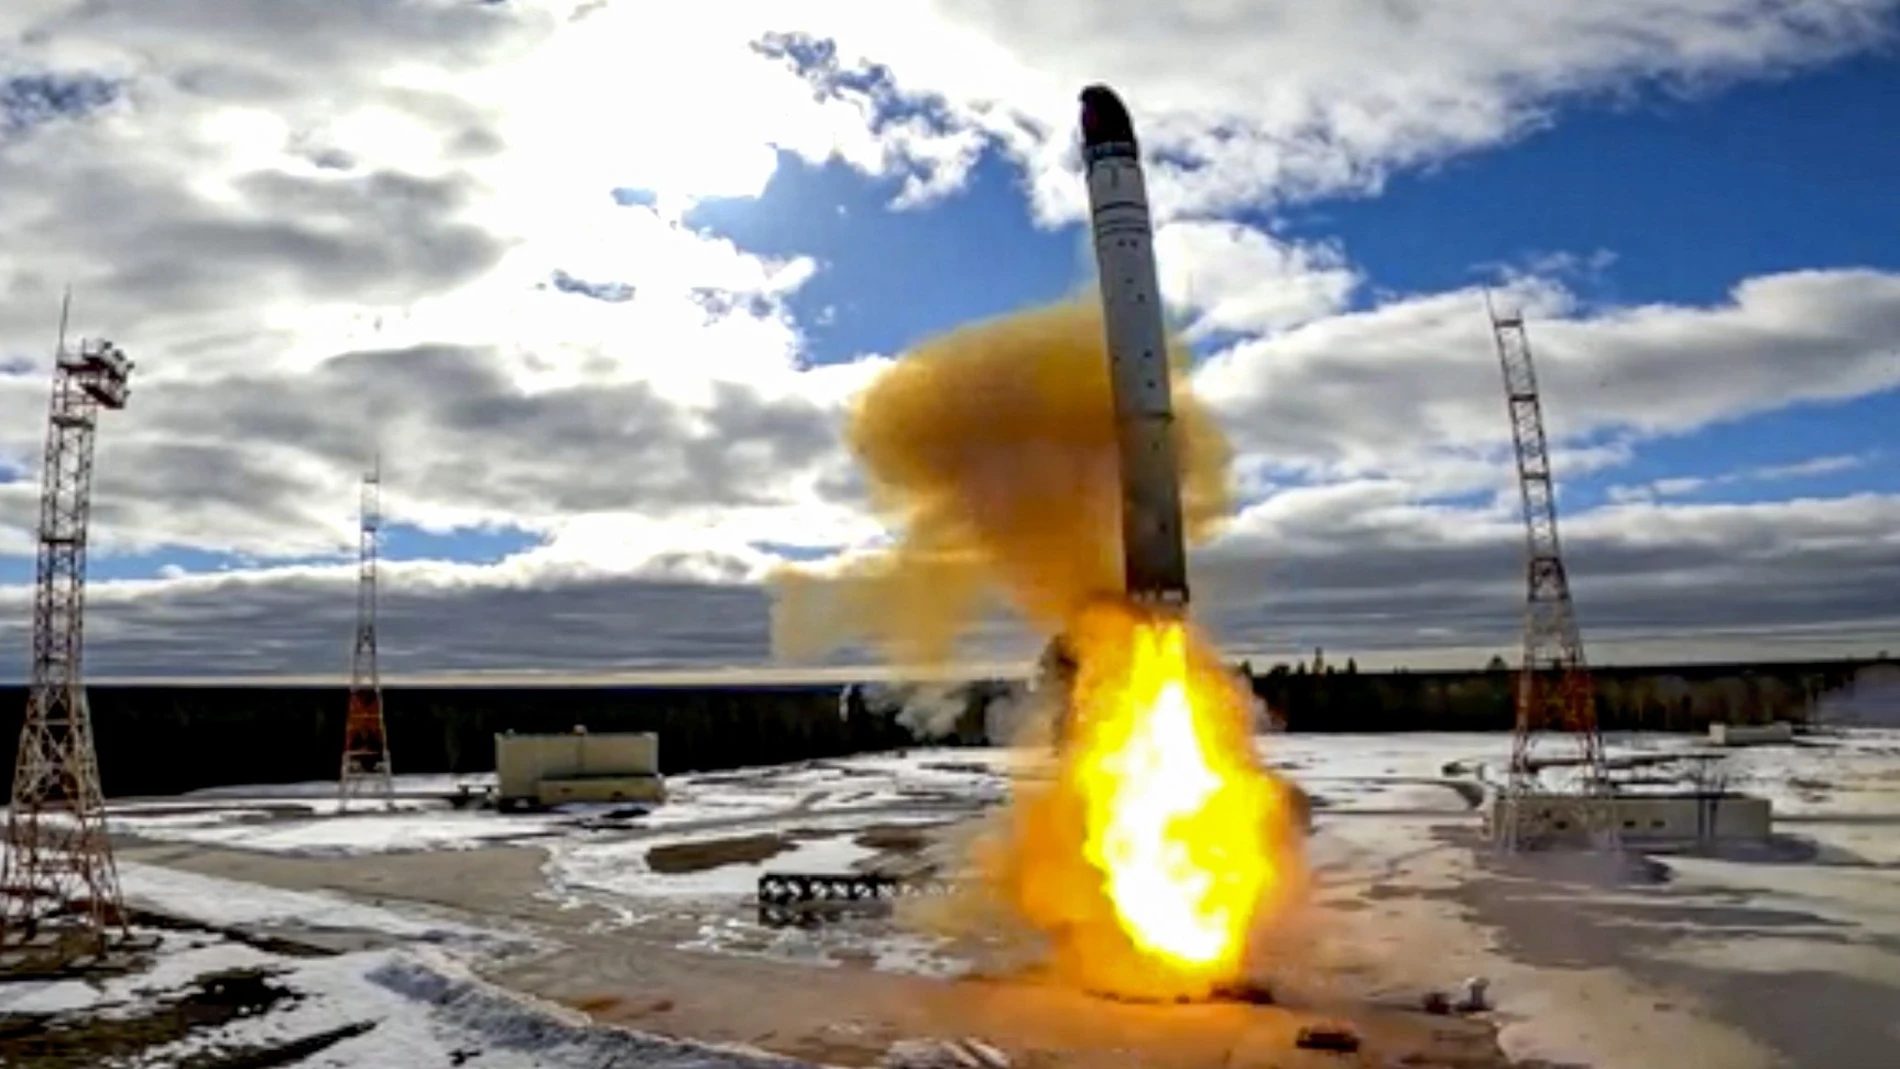 - A handout still image taken from handout video made available by the Russian Defence ministry press-service shows launch of the Russian new intercontinental ballistic missile 'Sarmat' on Plesetsk Cosmodrome in Arkhangelsk region, (800 km north of Moscow), Russia, 20 April 2022. The 'Sarmat' missile has unique characteristics that allow it to reliably overcome any existing and future anti-missile defense systems. 'Thanks to the energy-mass characteristics of the missile, the range of its combat equipment has fundamentally expanded both in terms of the number of warheads and types, including planning hypersonic units,' said a statement from the Russian Defense ministry. (Rusia